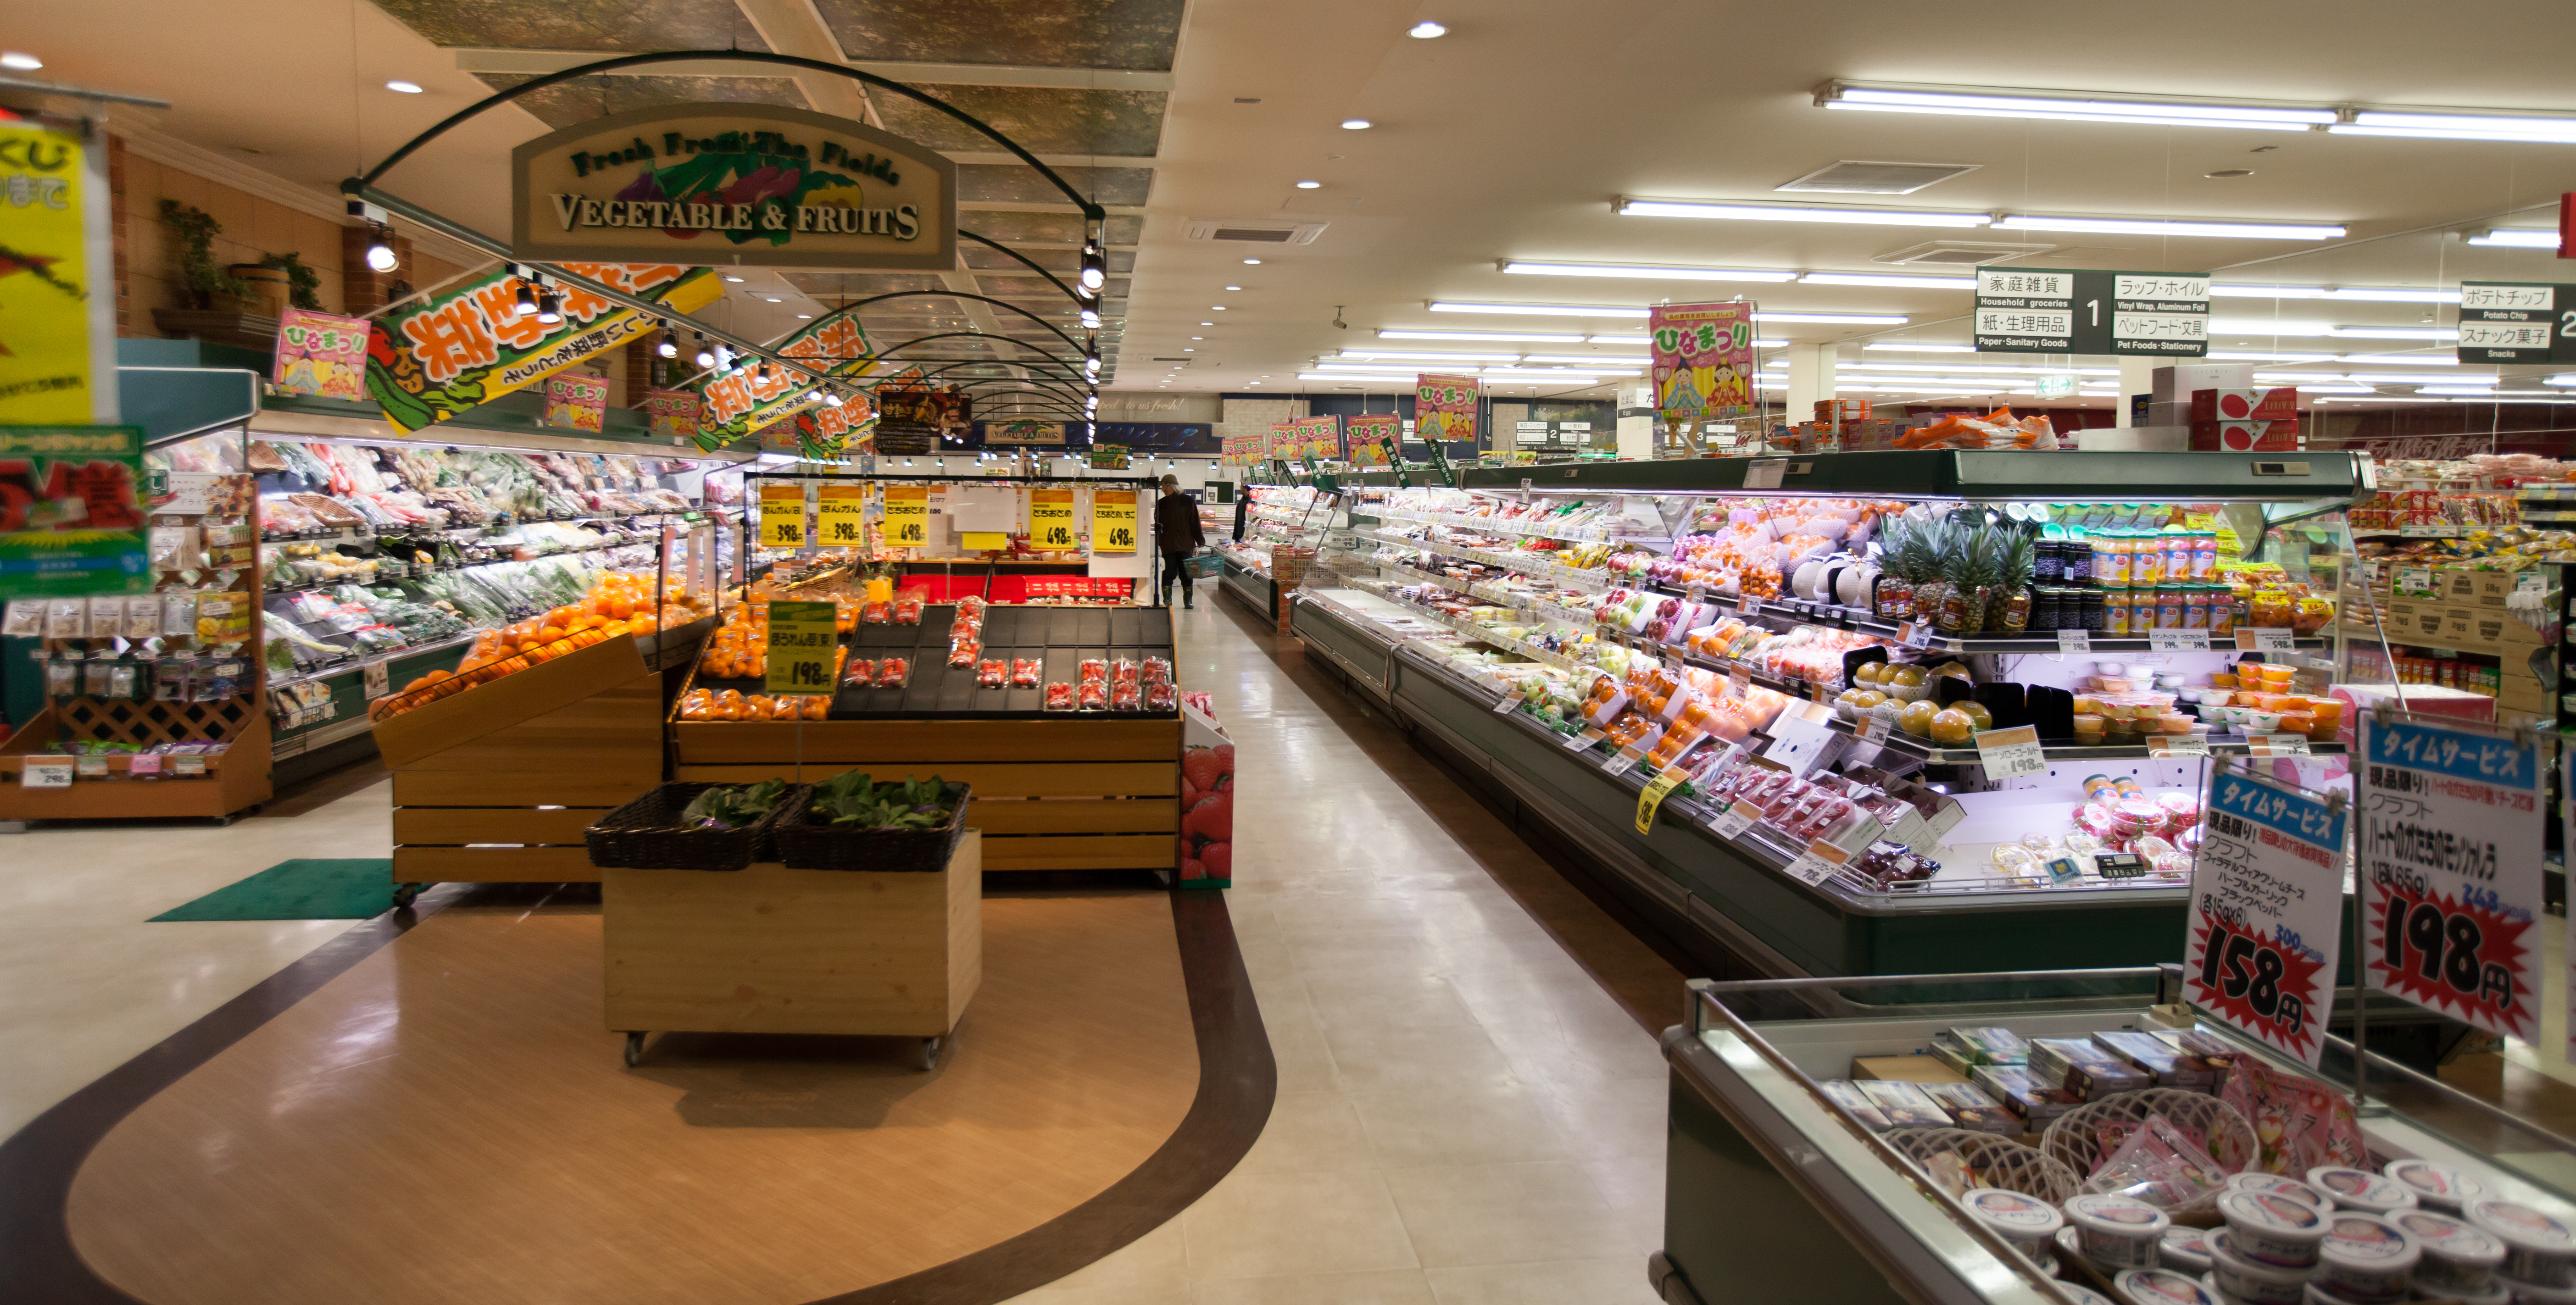 Grocery stores in Japan